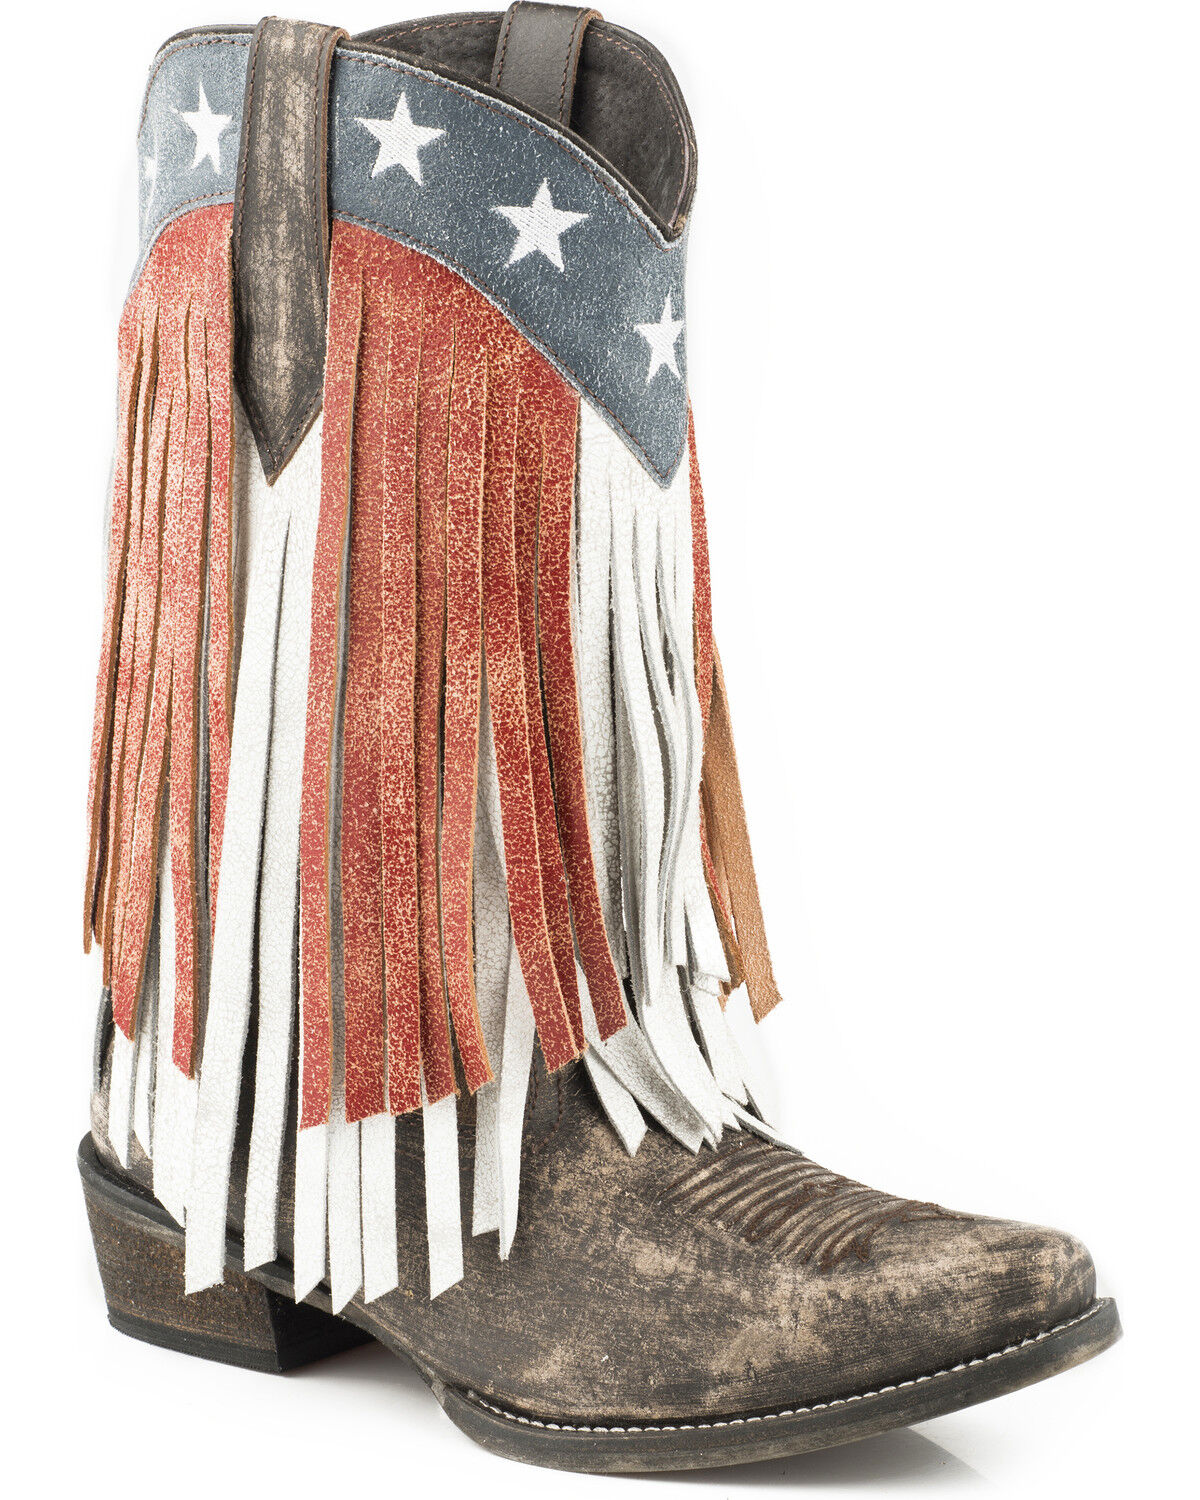 white cowgirl boots with fringe